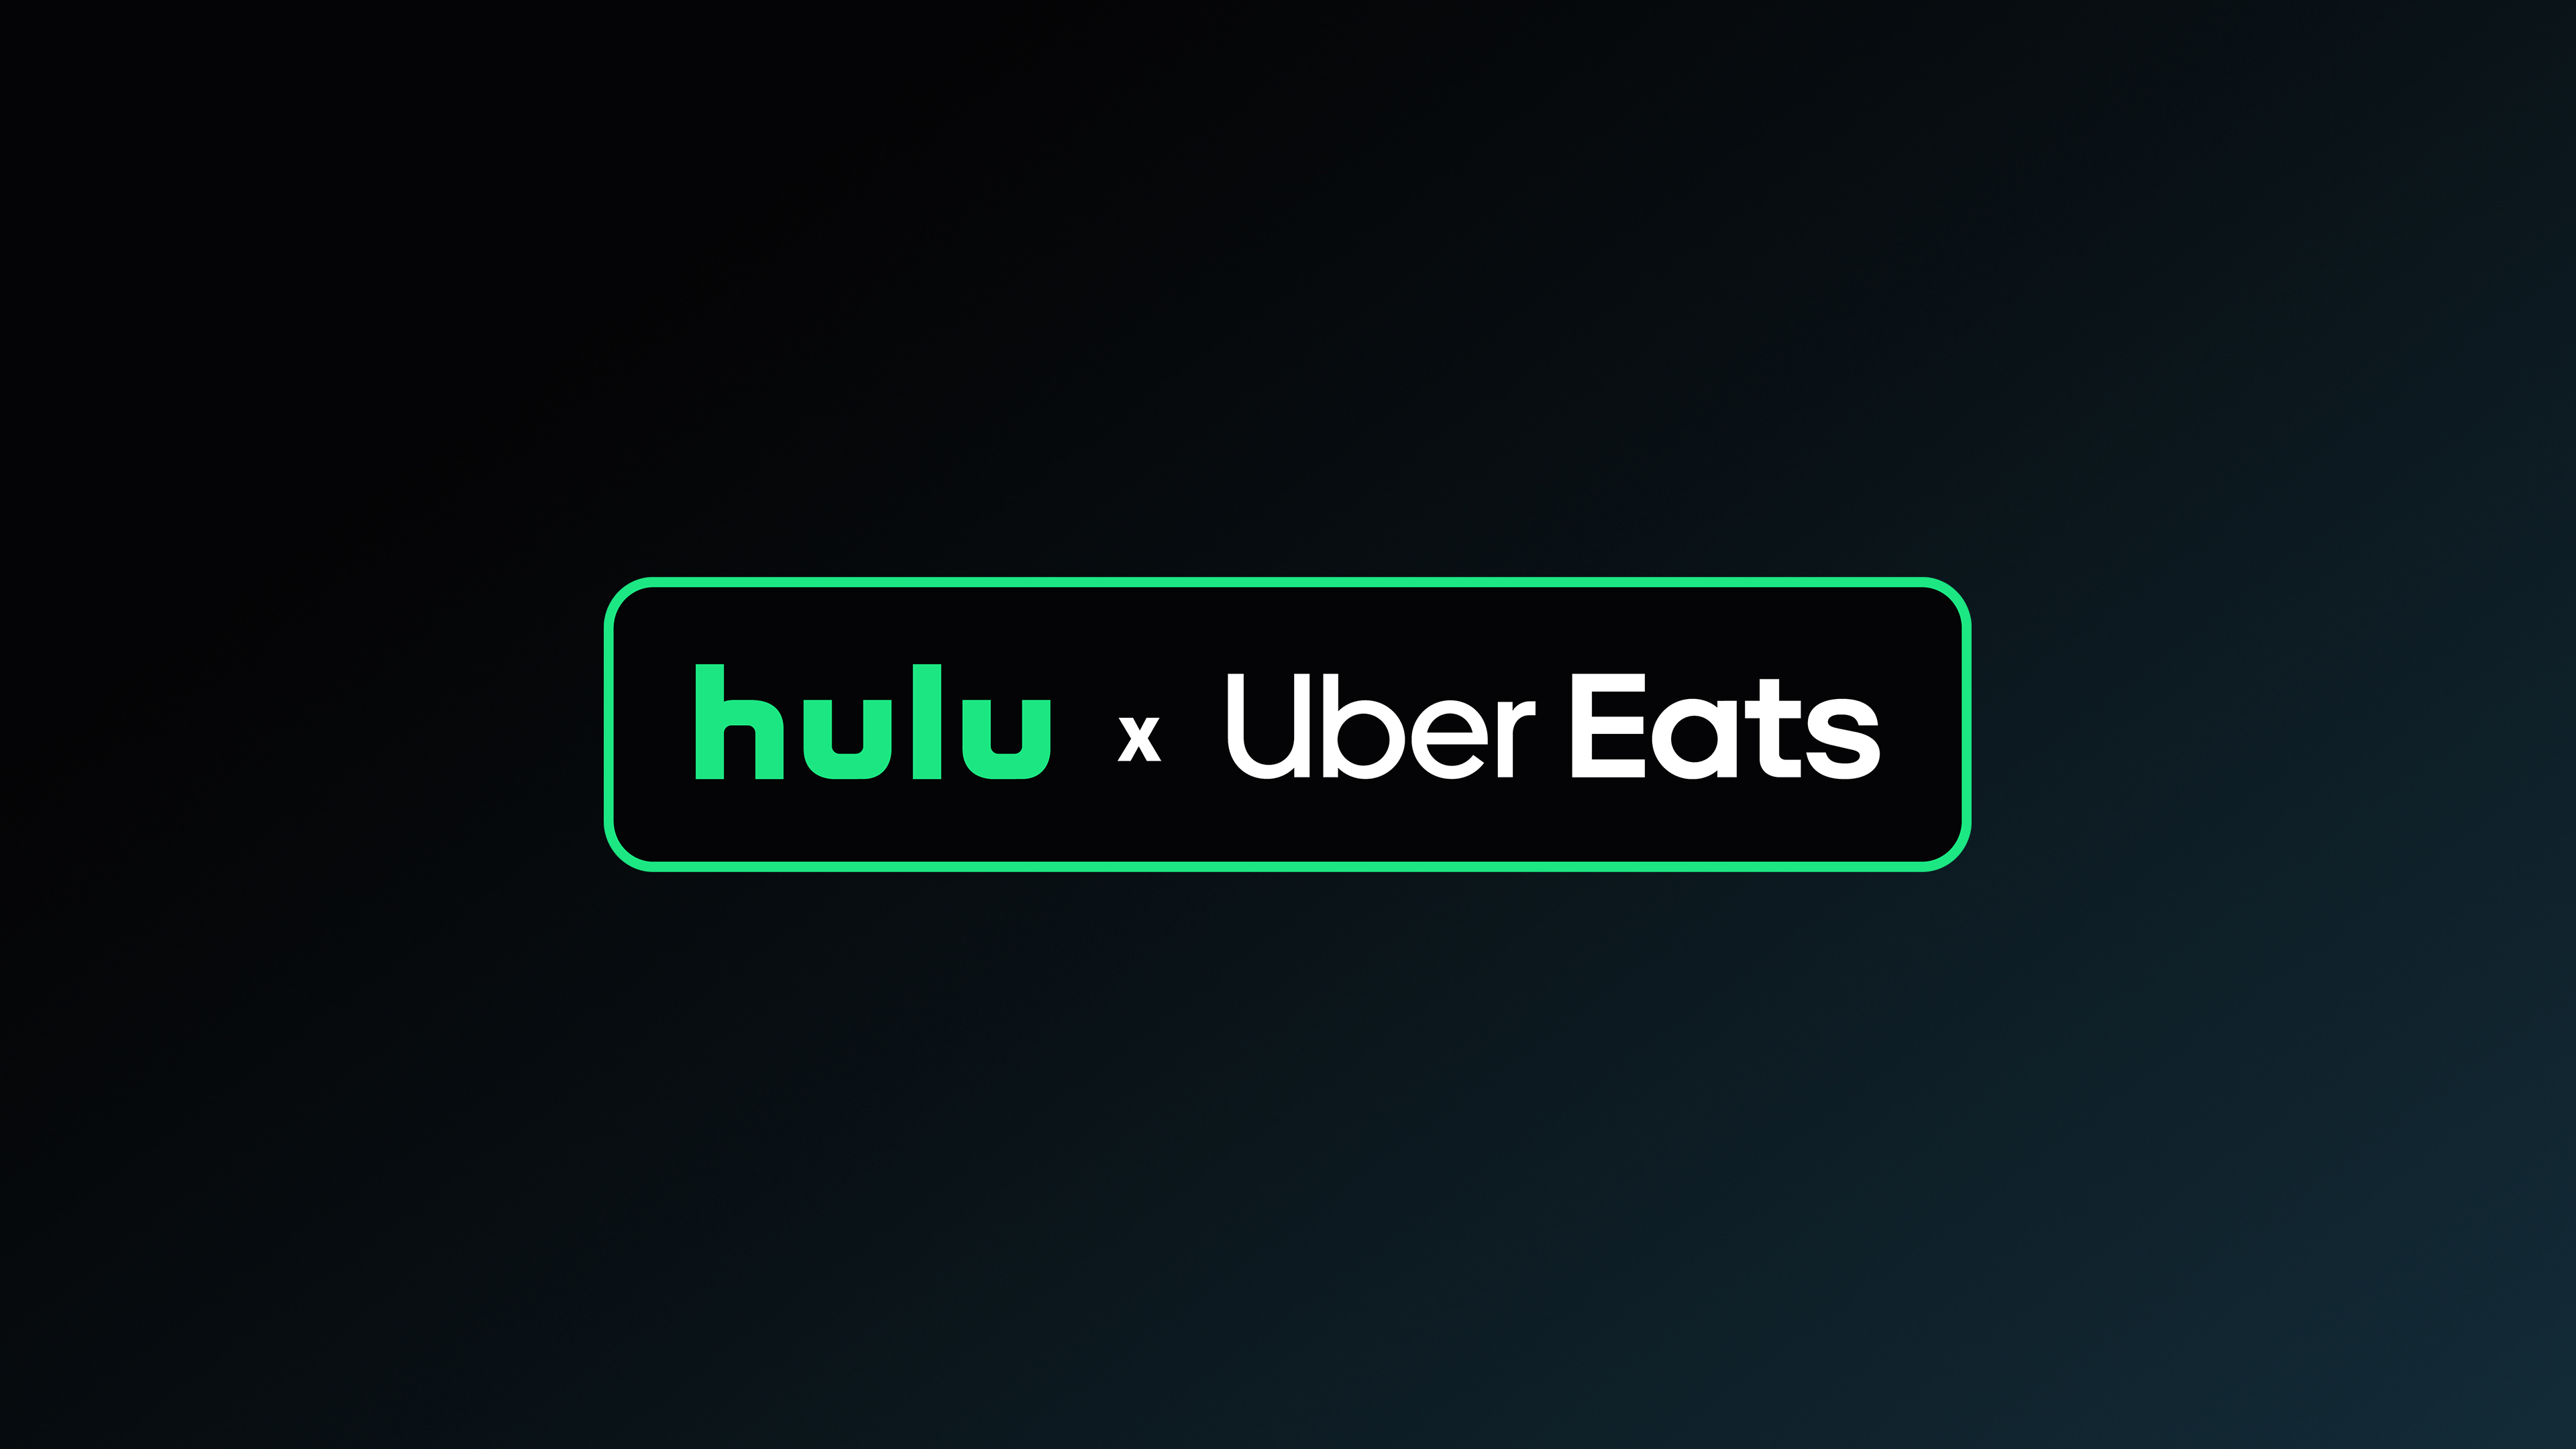 Hulu and Uber Eats Announce Partnership to Give Eligible Hulu 